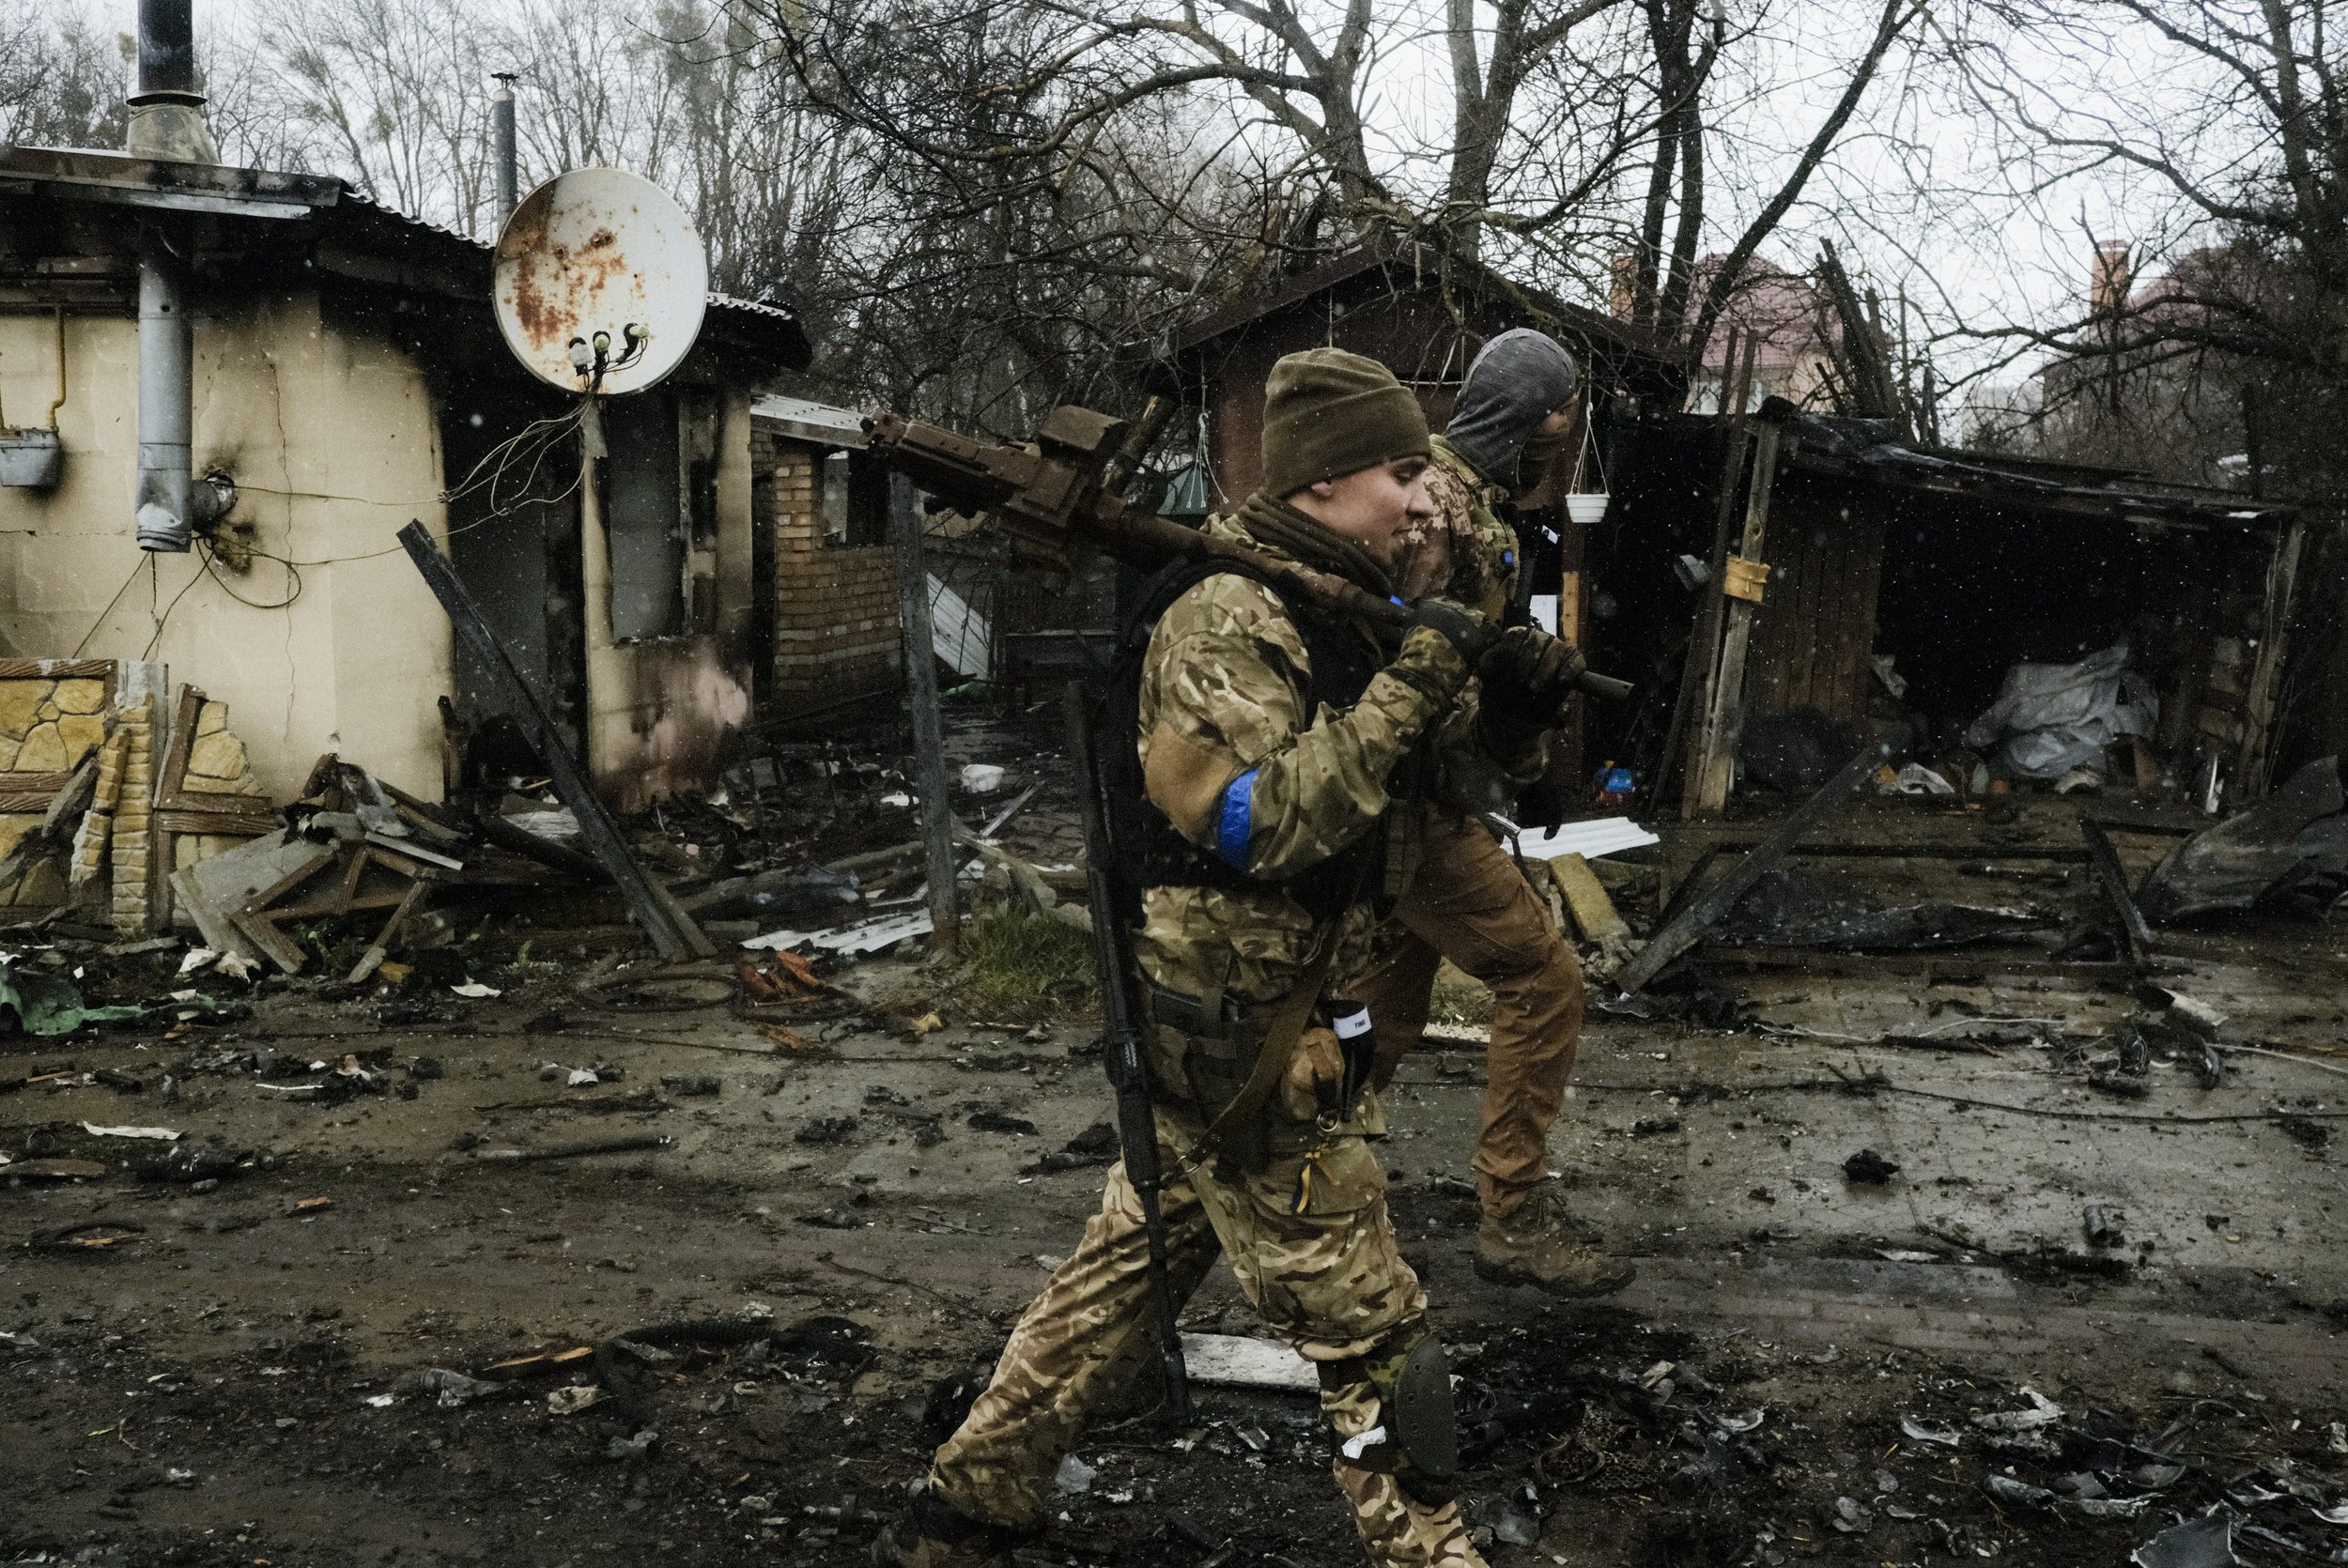  Ukrainian soldiers carry a machine gun and other equipment stripped from destroyed tanks in Bucha, Ukraine on April 3, 2022. Fierce fighting in the suburbs of Kyiv eventually forced the poorly trained and unprepared Russian forces to withdraw to the